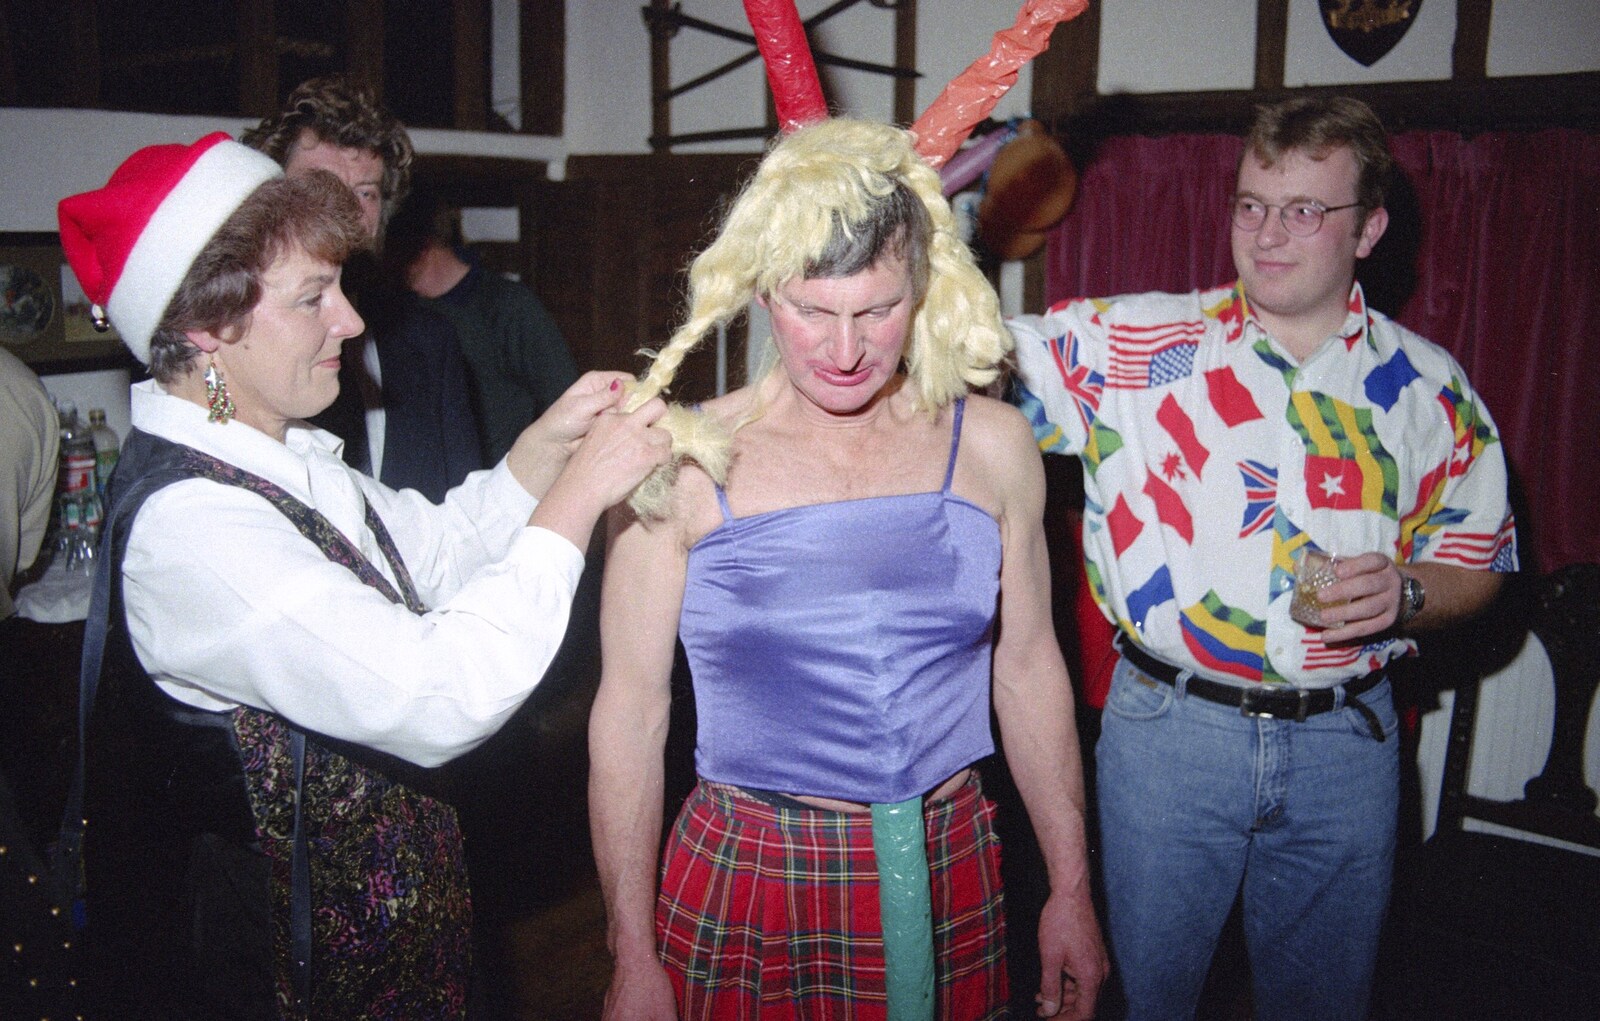 Sue Ogilsby does some kind of plaiting from Geoff's Birthday, Stuston, Suffolk - 18th December 1995